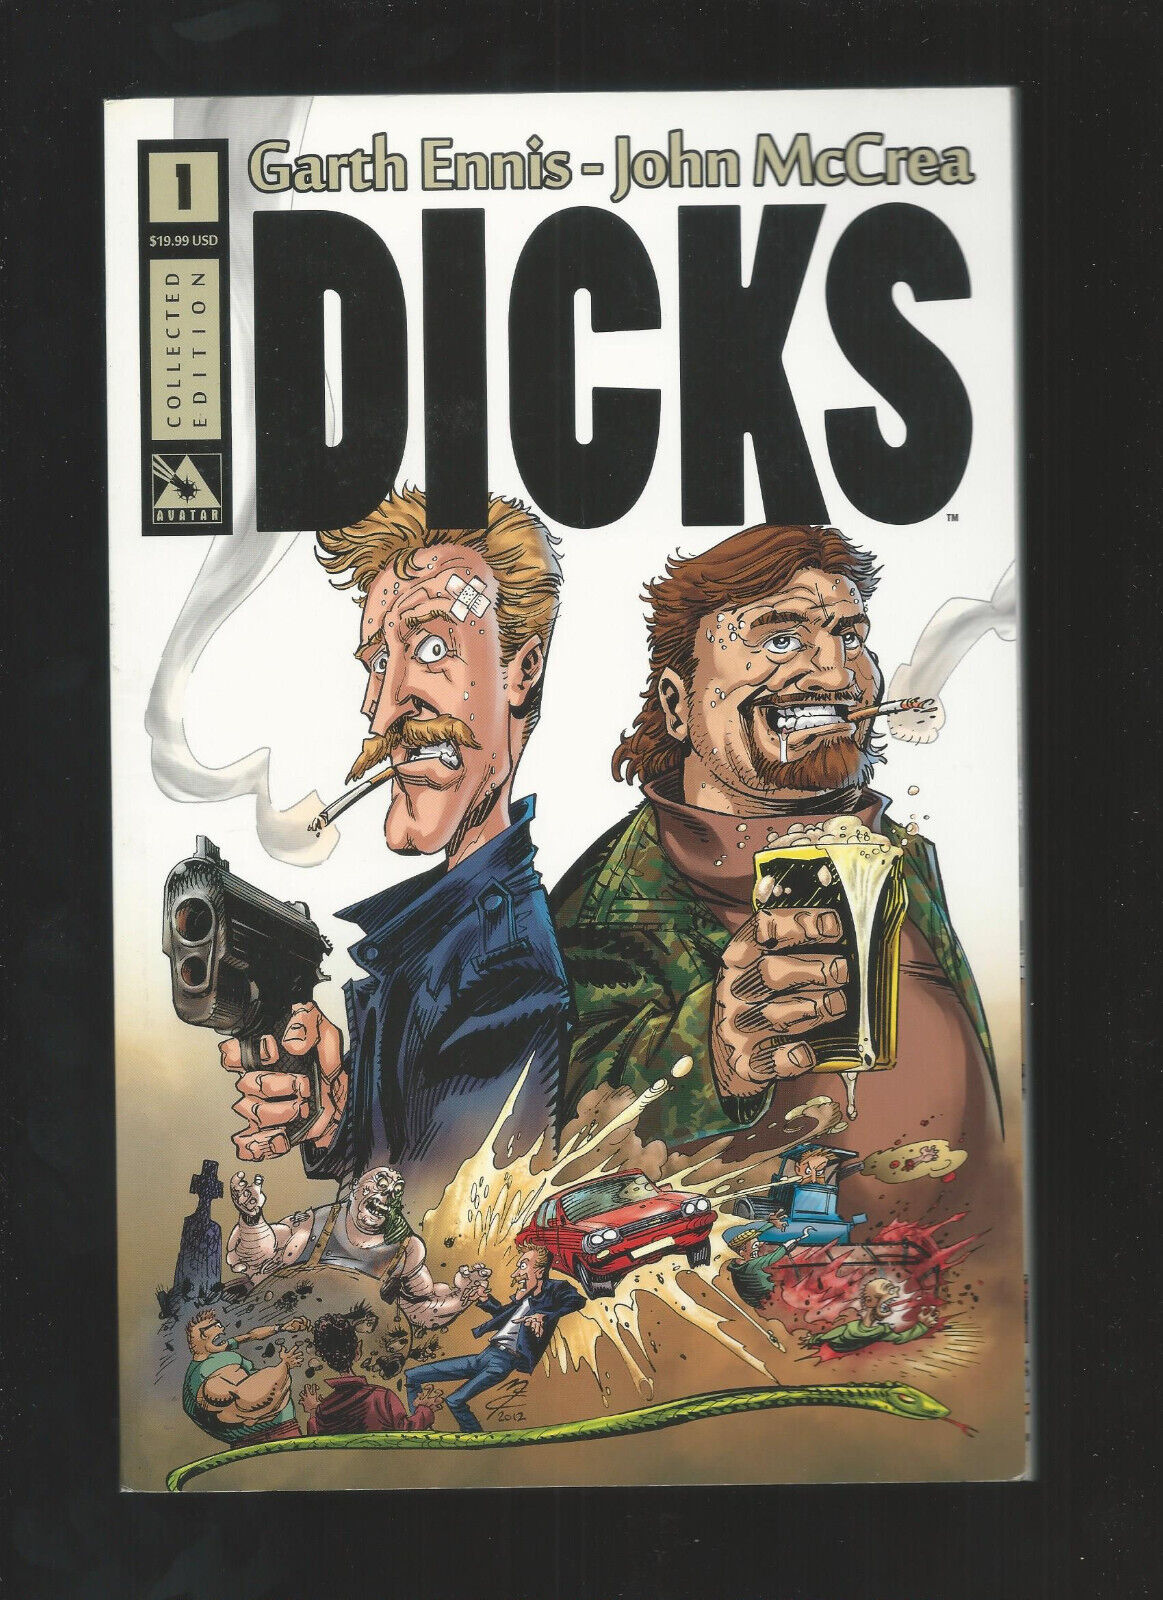 Dicks Volume 1 Collected Edition Trade Paperback by Garth Ennis